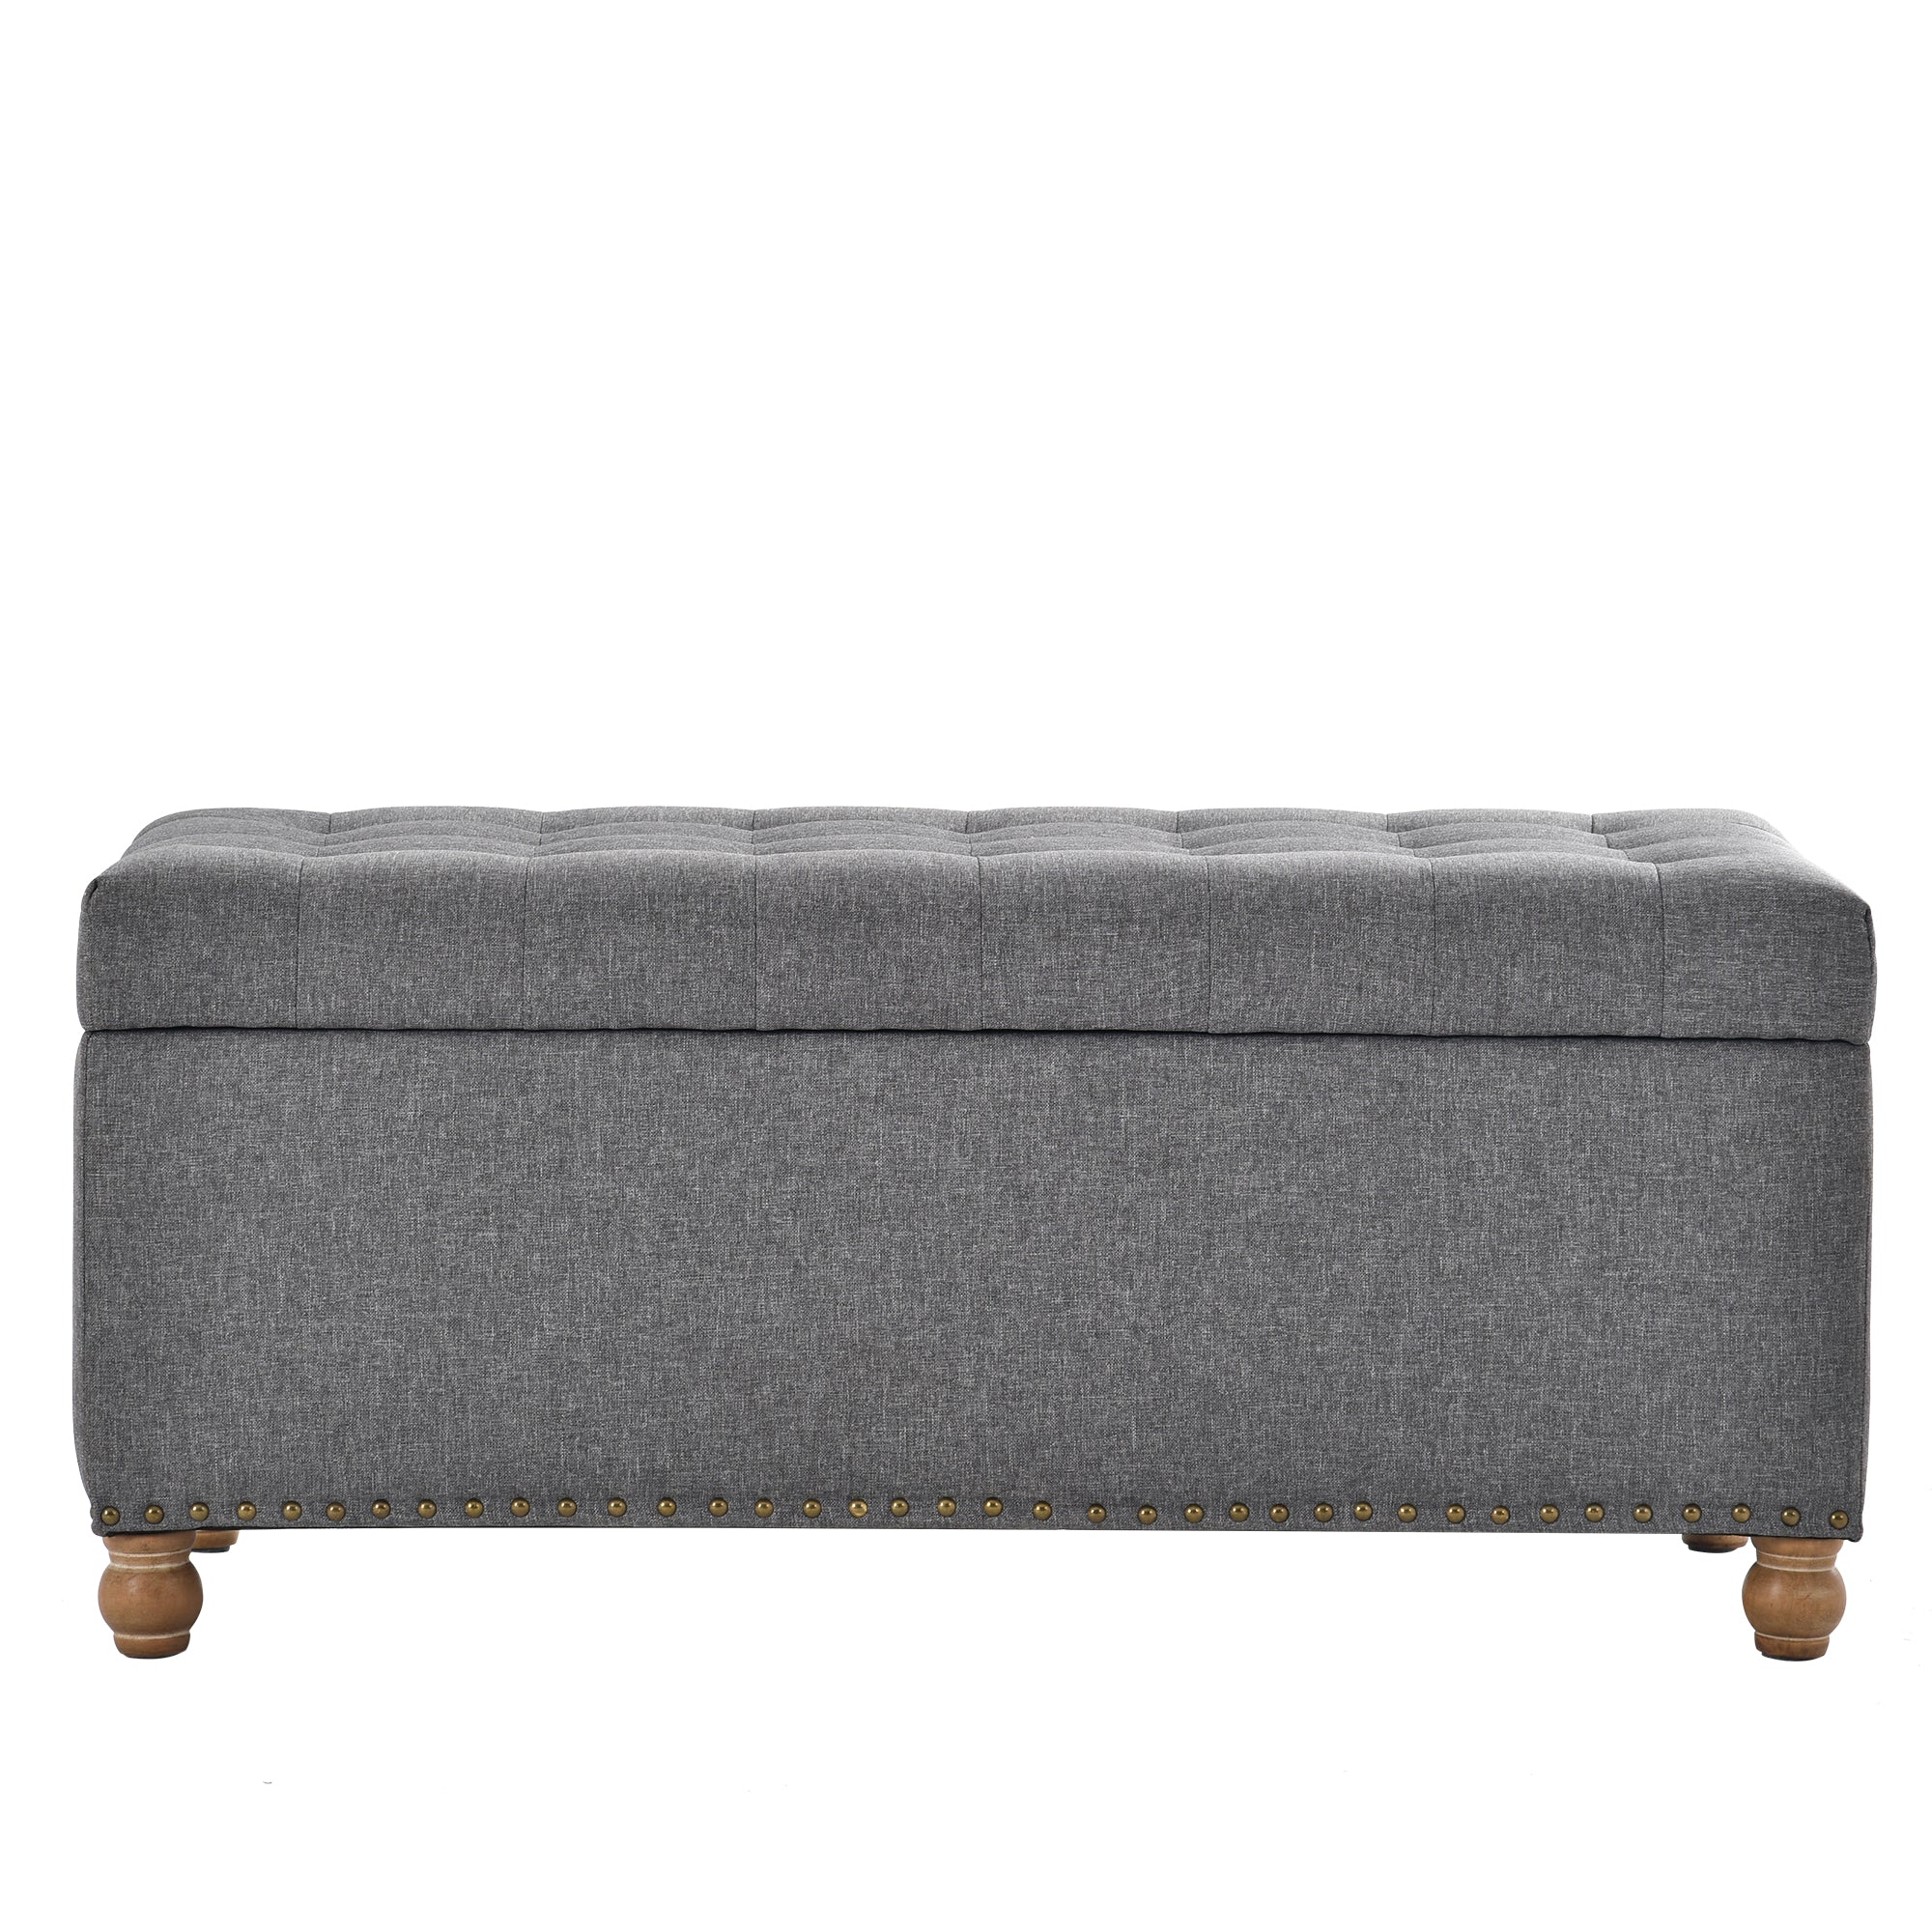 Upholstered Flip Top Storage Bench with Tufted Top, Rubber wood legs